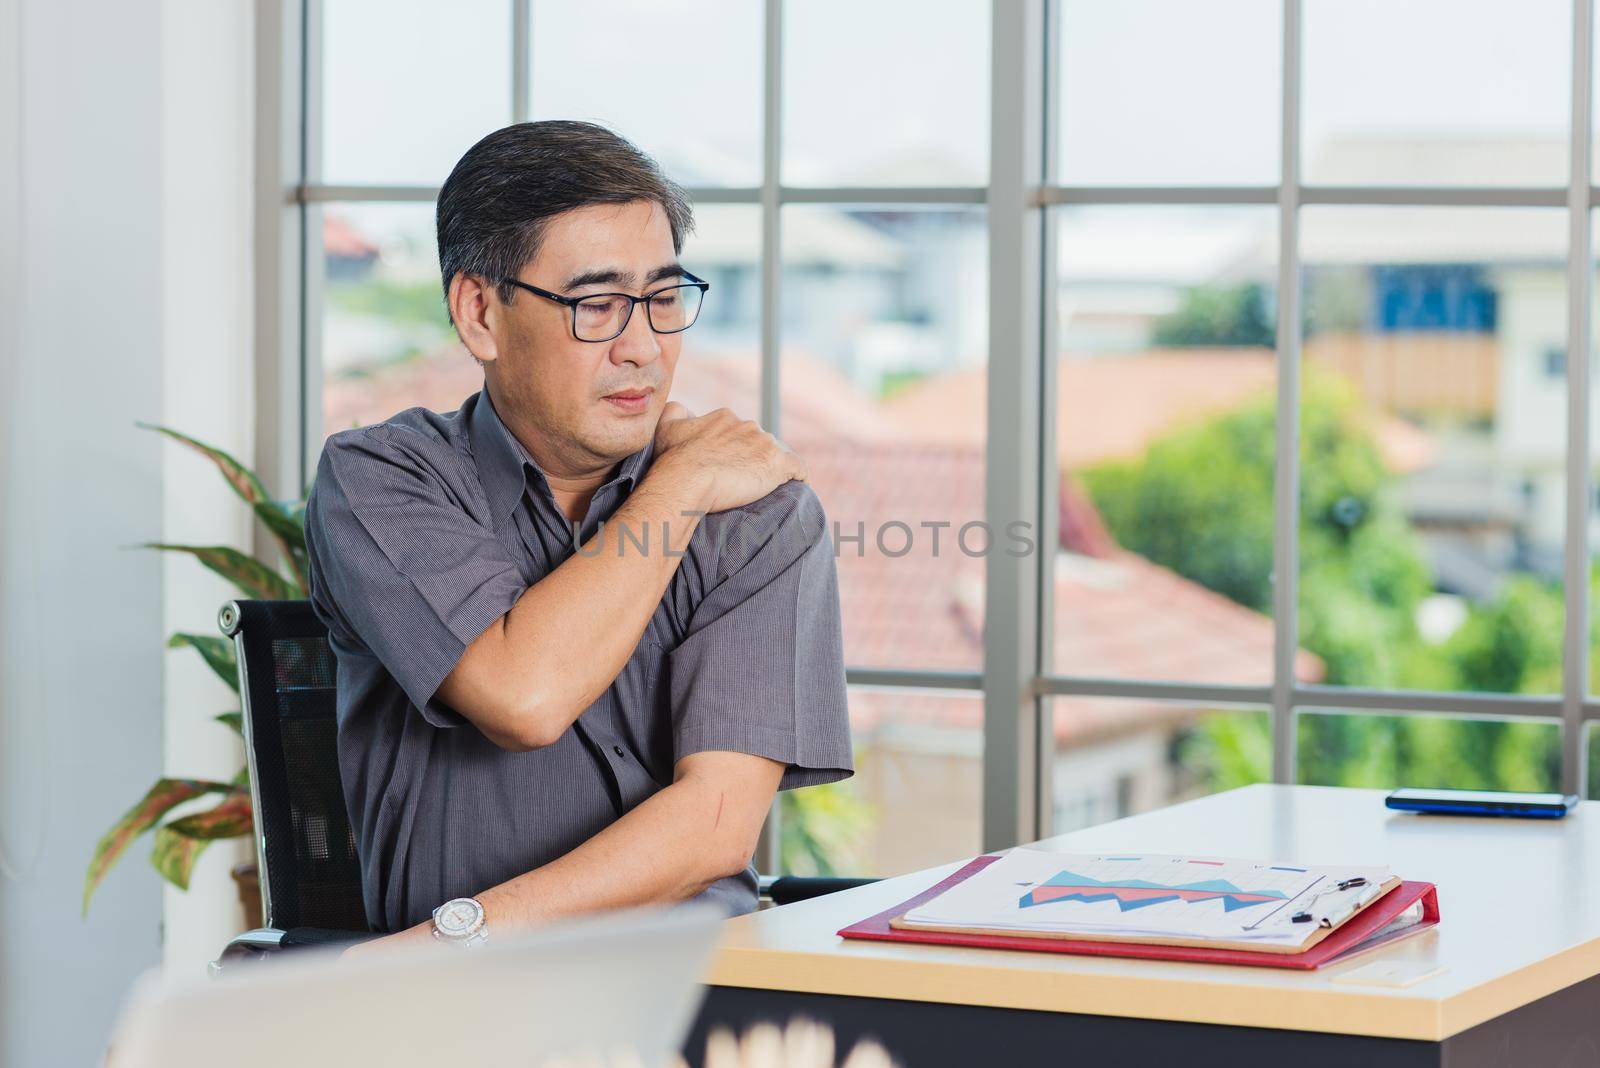 Asian hard senior businessman working with laptop computer has a problem with shoulder pain. Old man feeling pain after sitting at desk long time, Healthcare and medicine office syndrome concept